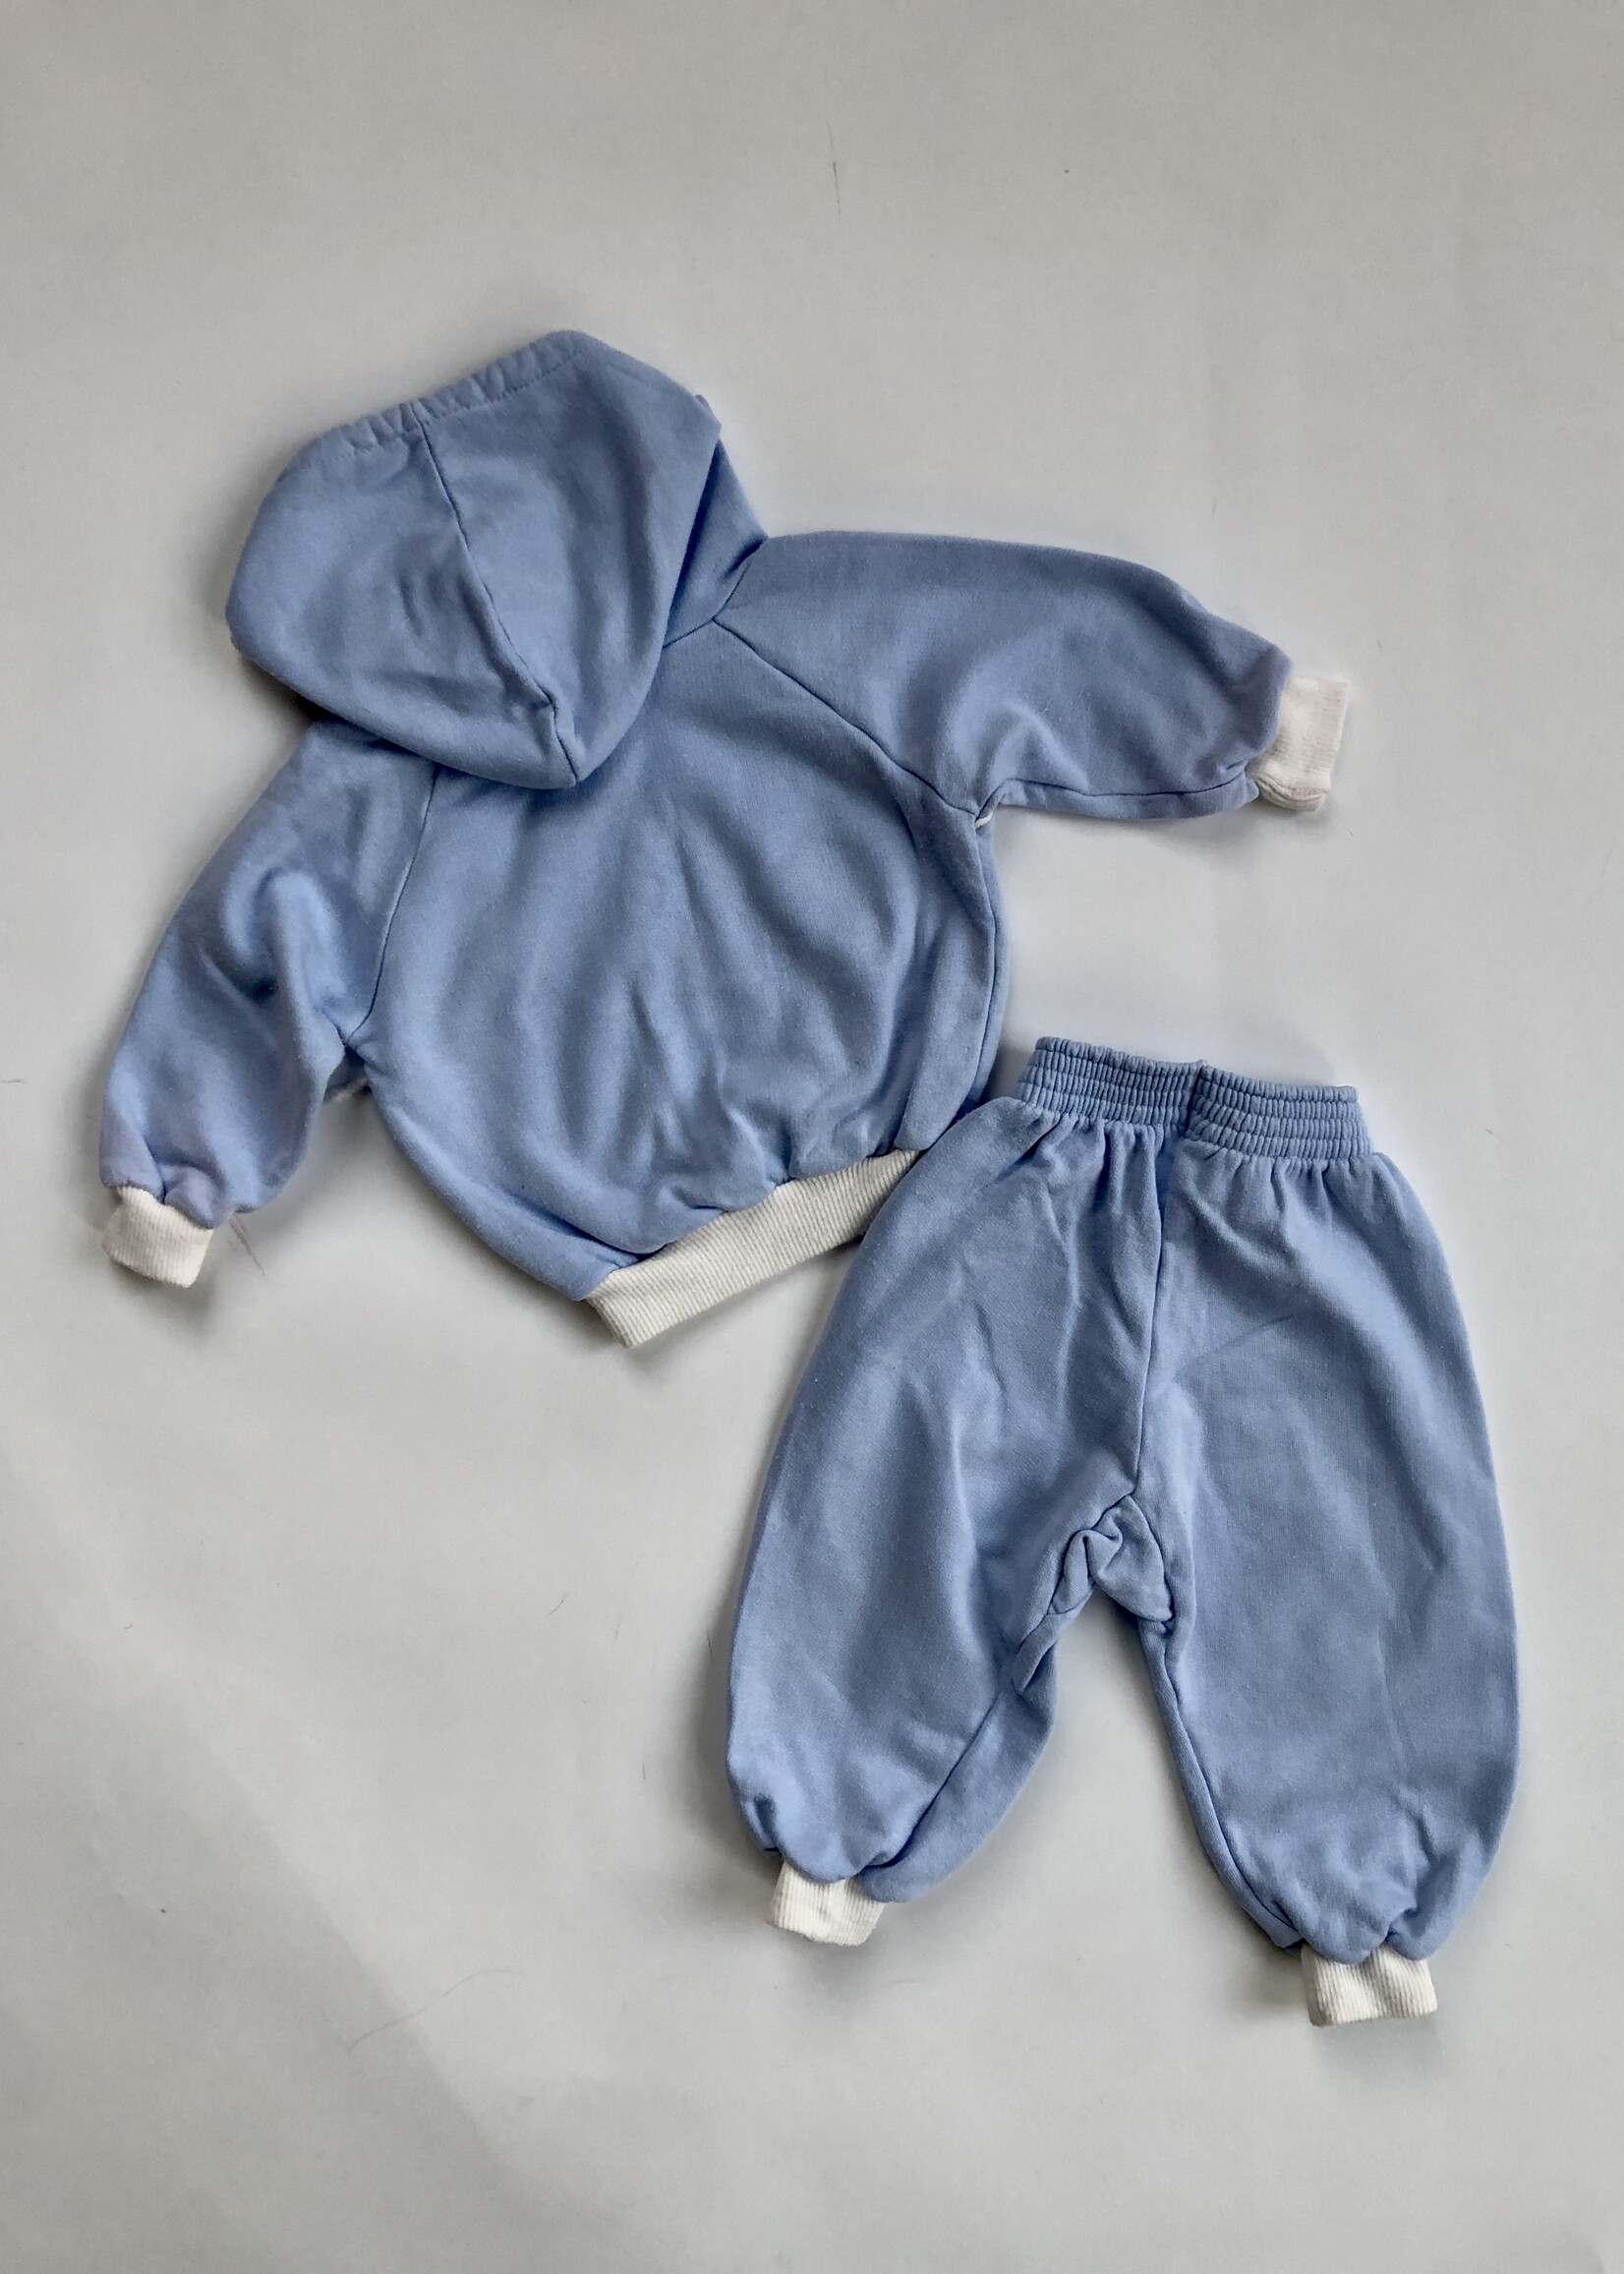 Kiss from California jogging suit 9-12m